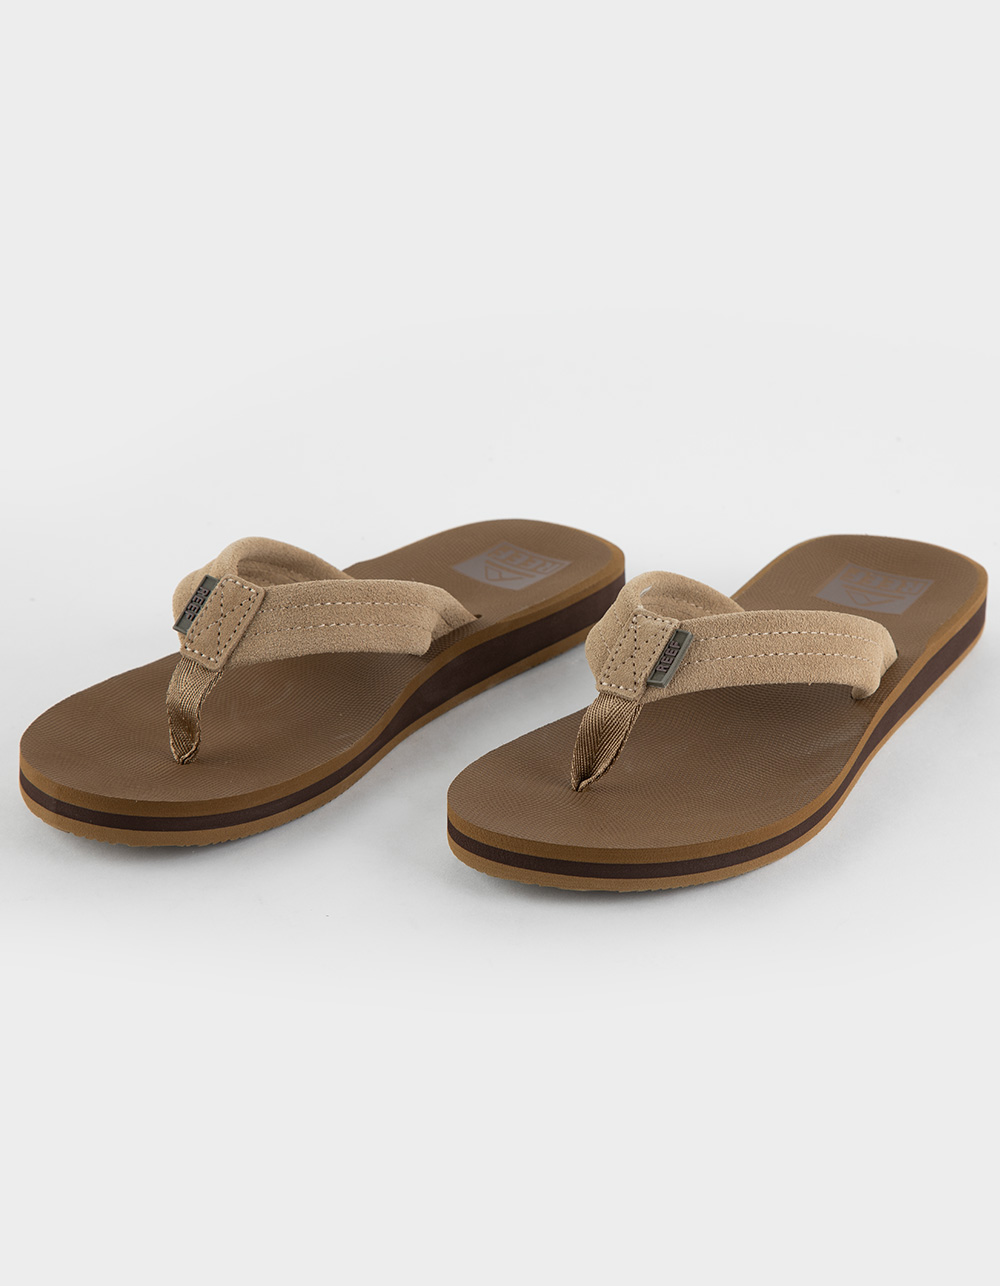 Stoney River Women's Sunny Slippers - Tan 7 by Sportsman's Warehouse